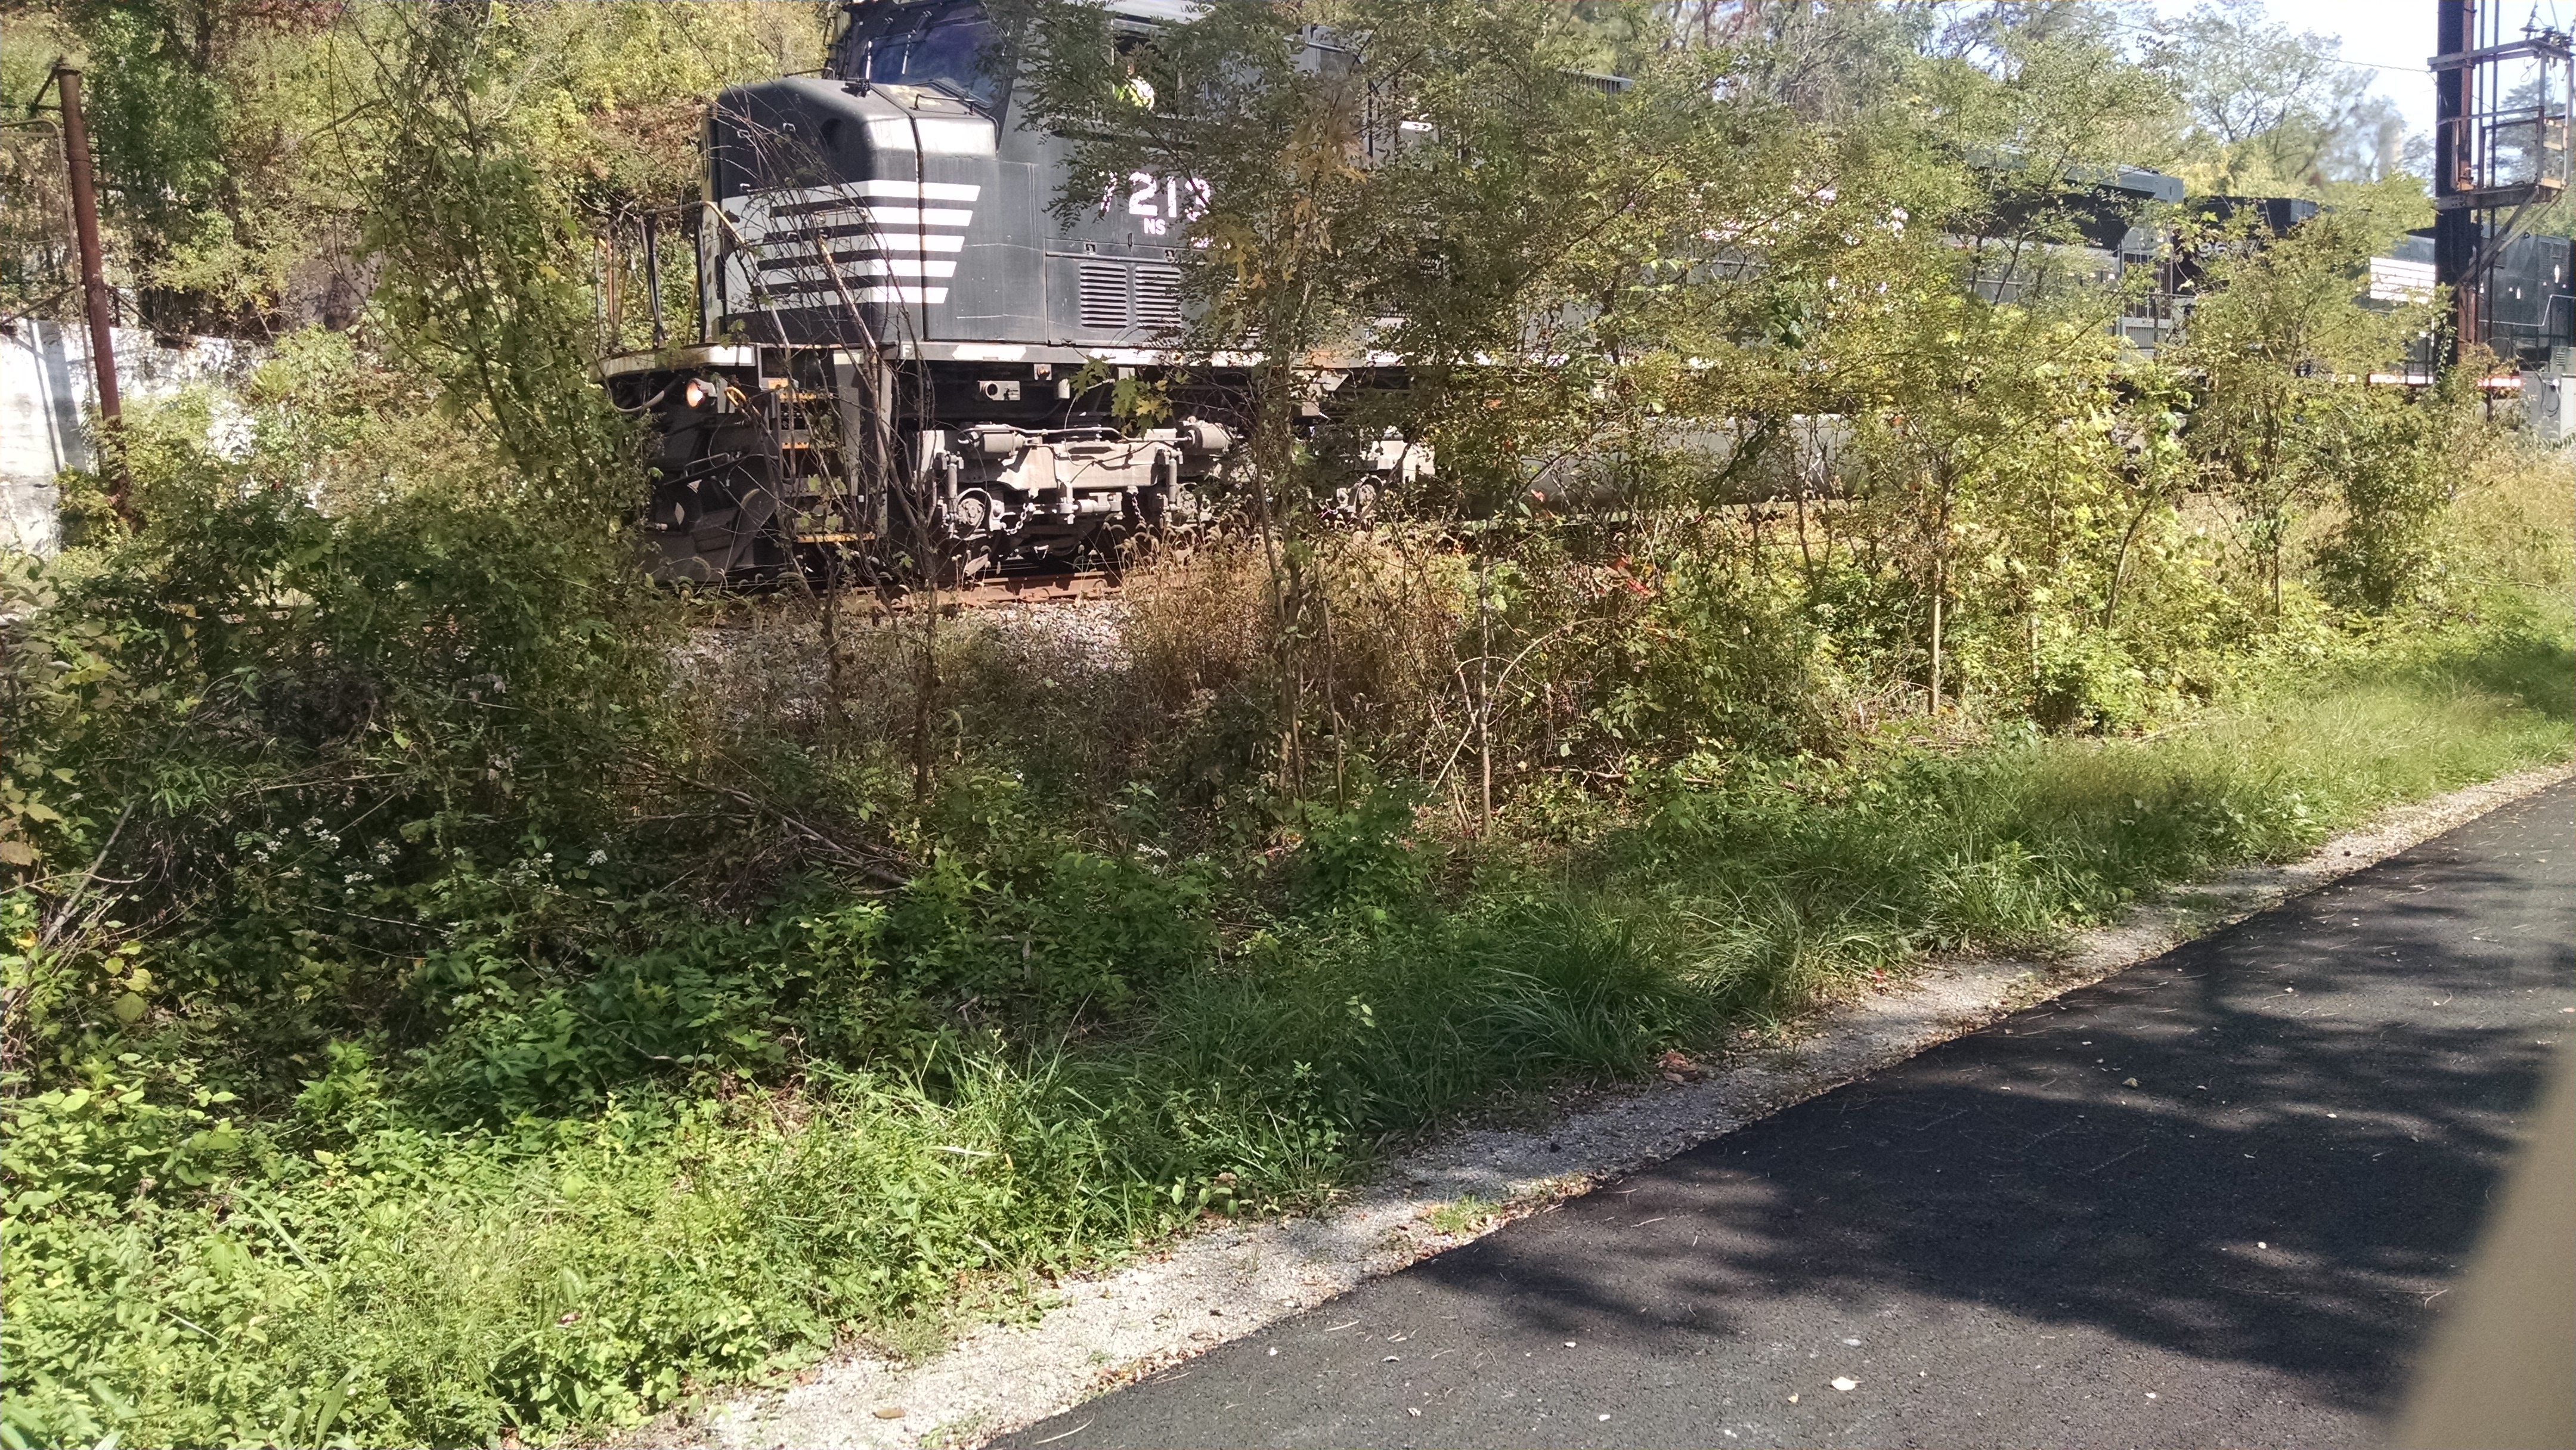 This picture shows an engine of a freight train as it's passing by on the tracks just off a biking/hiking trail.